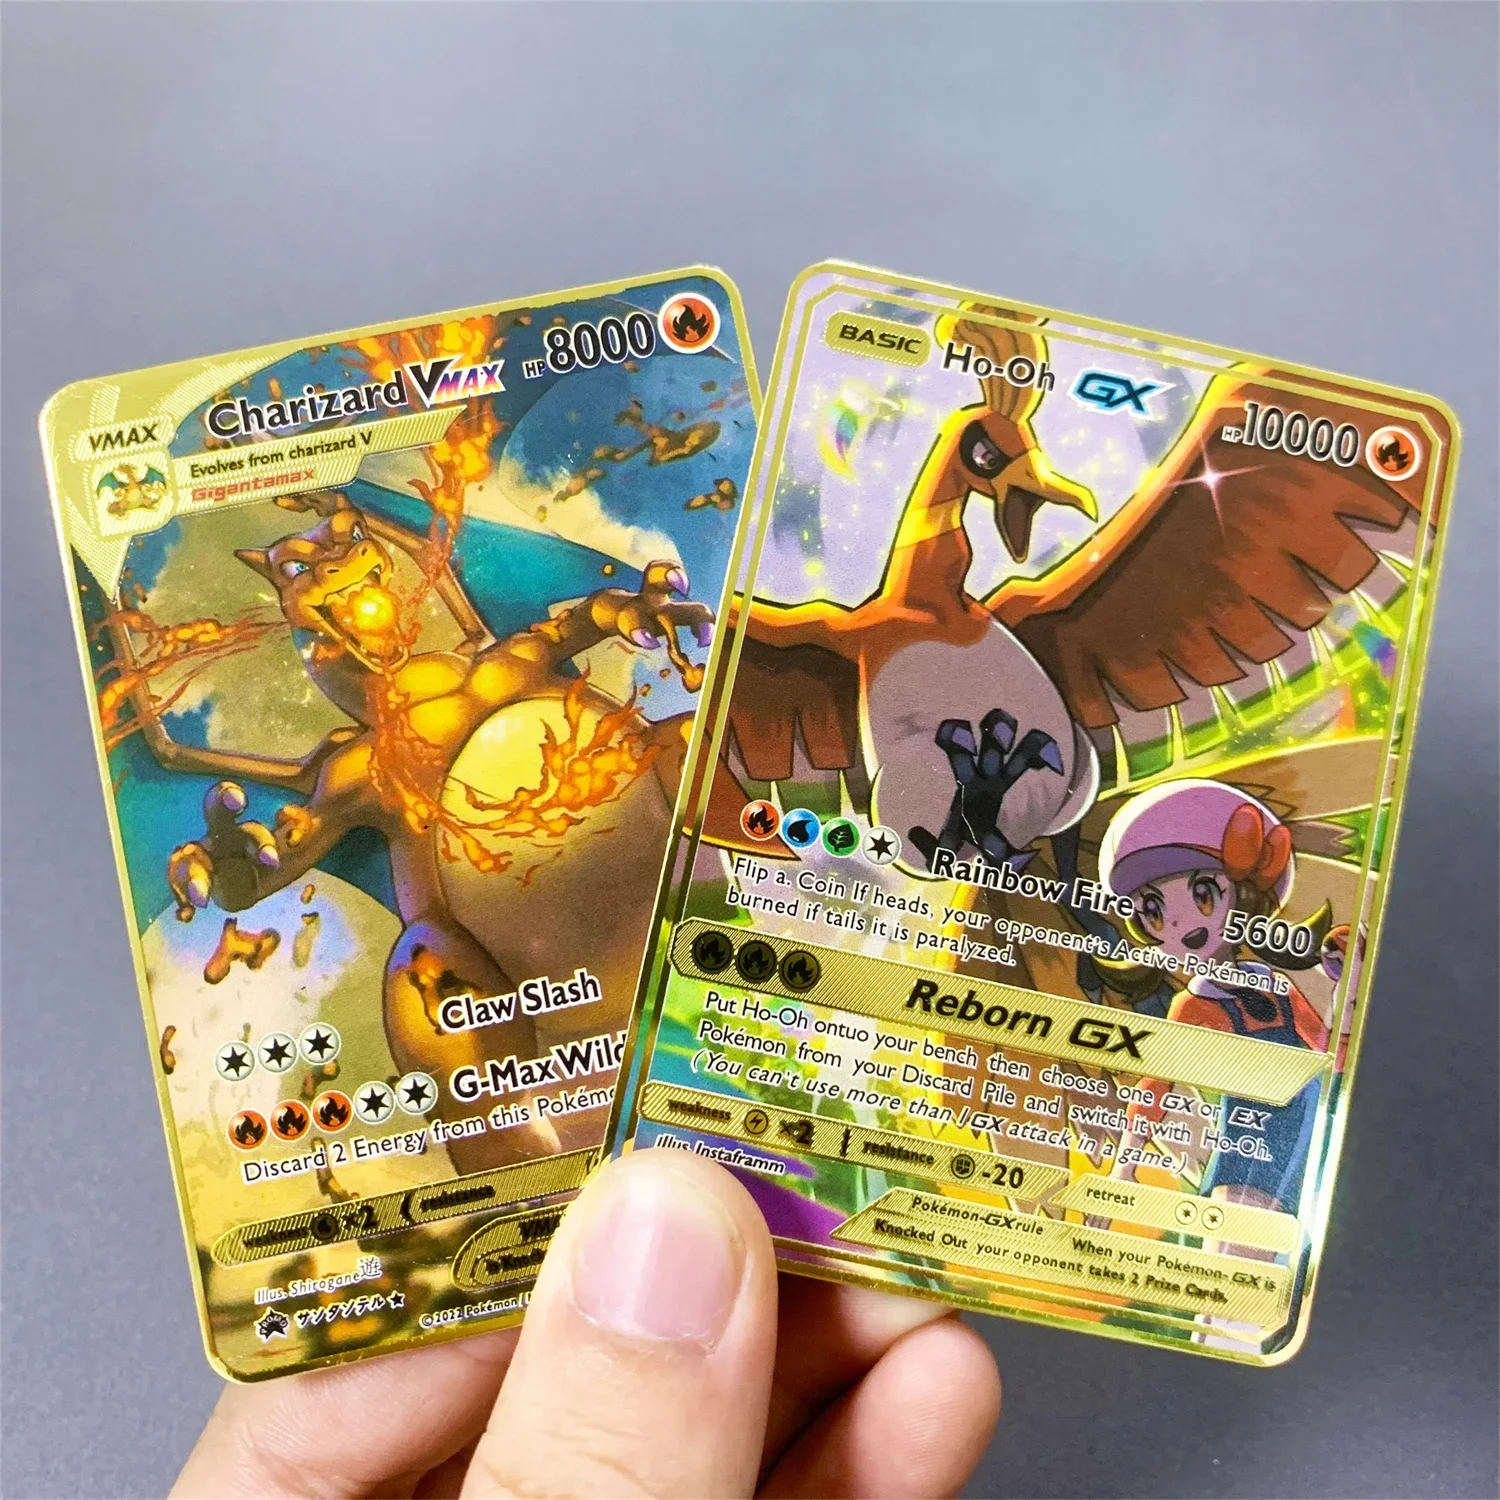 

English 10000 Point Metal Card Gx Vmax Pokemon Metal Cards Pikachu Charizard Gold Limited Edition Kids Gift Game Collection Card